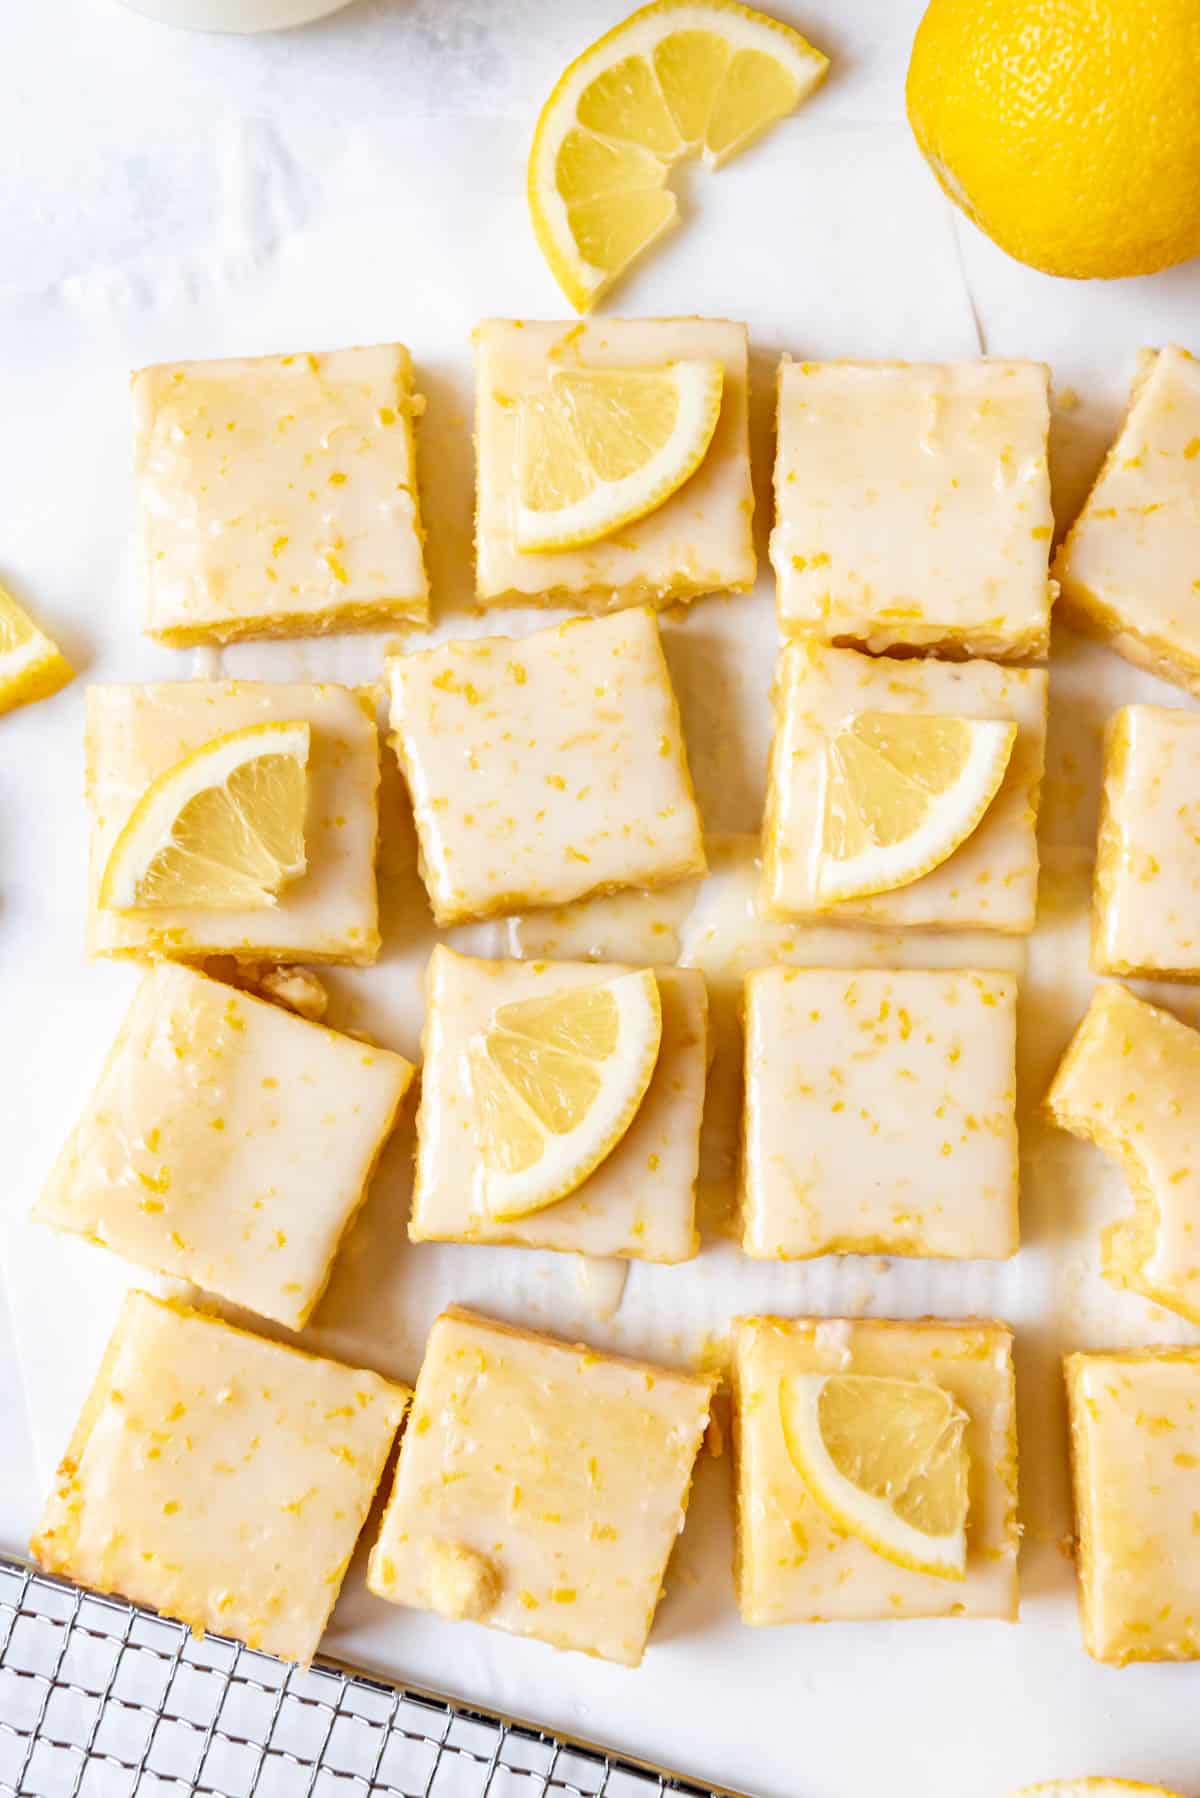 Glazed lemon blondie squares with thin lemon wedges decorating the tops of some of them.